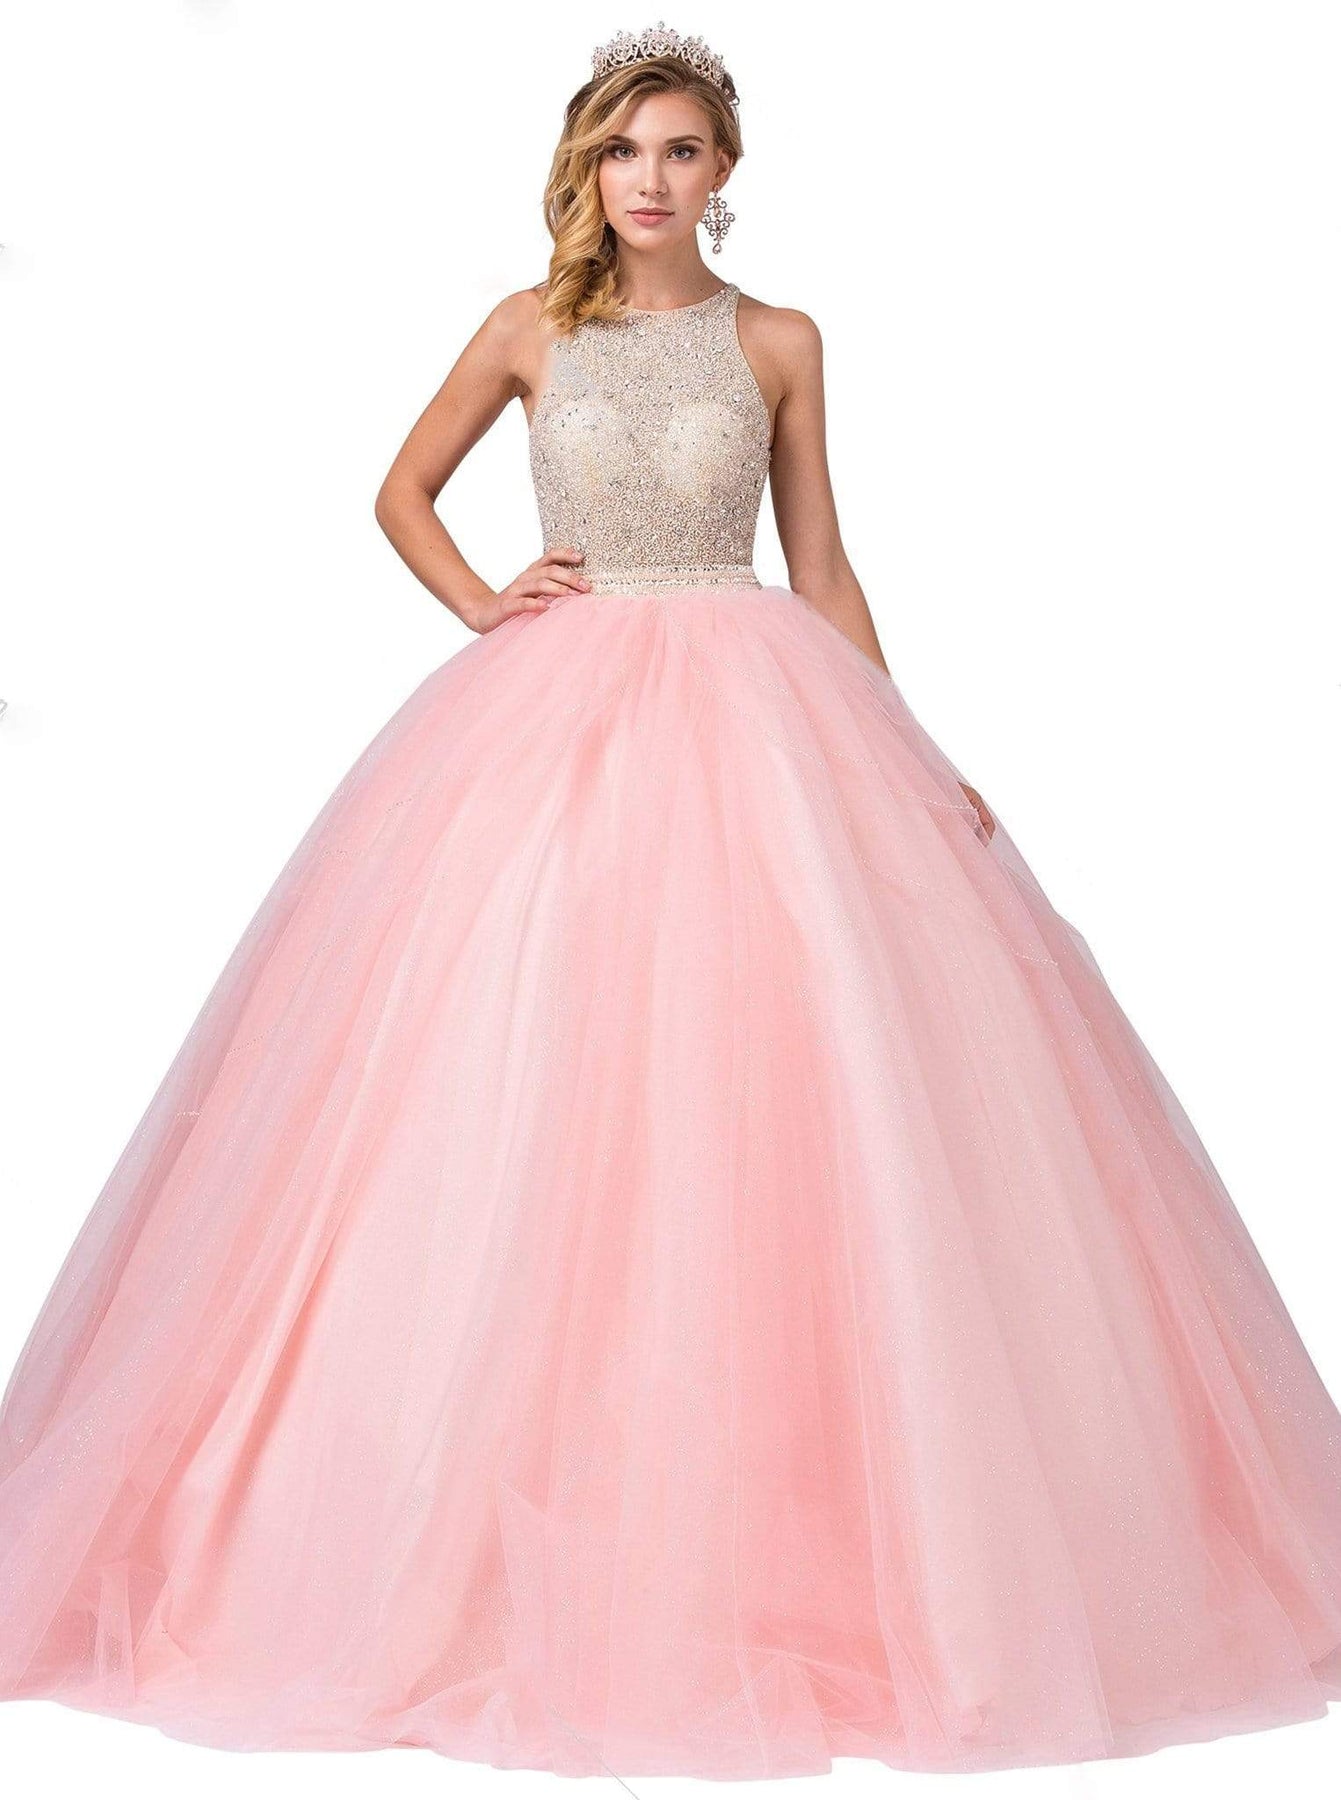 Dancing Queen - 1350 Jewel Studded Illusion Bodice Ballgown Special Occasion Dress XS / Blush